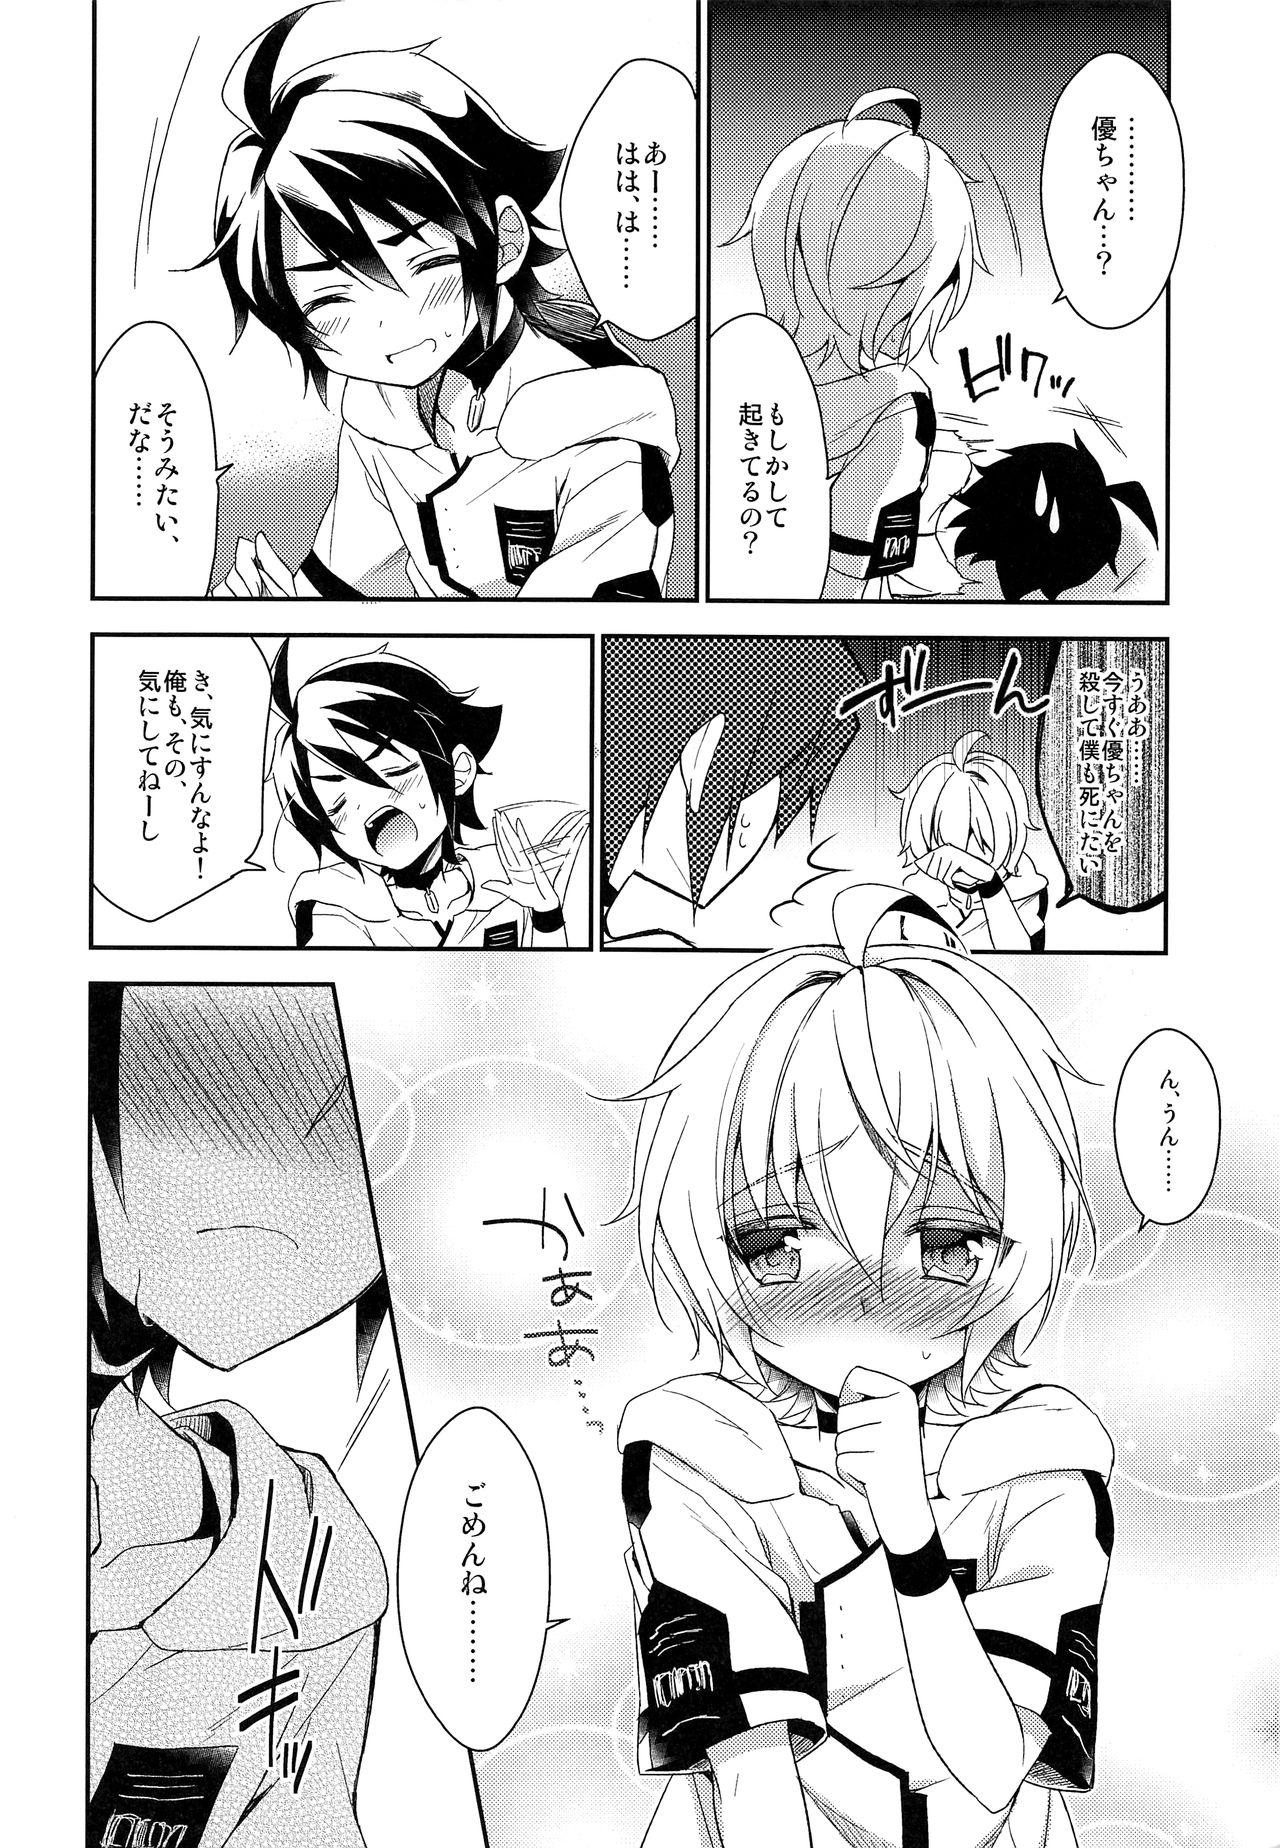 Workout Tenshi no Tawamure - Seraph of the end Leite - Page 5